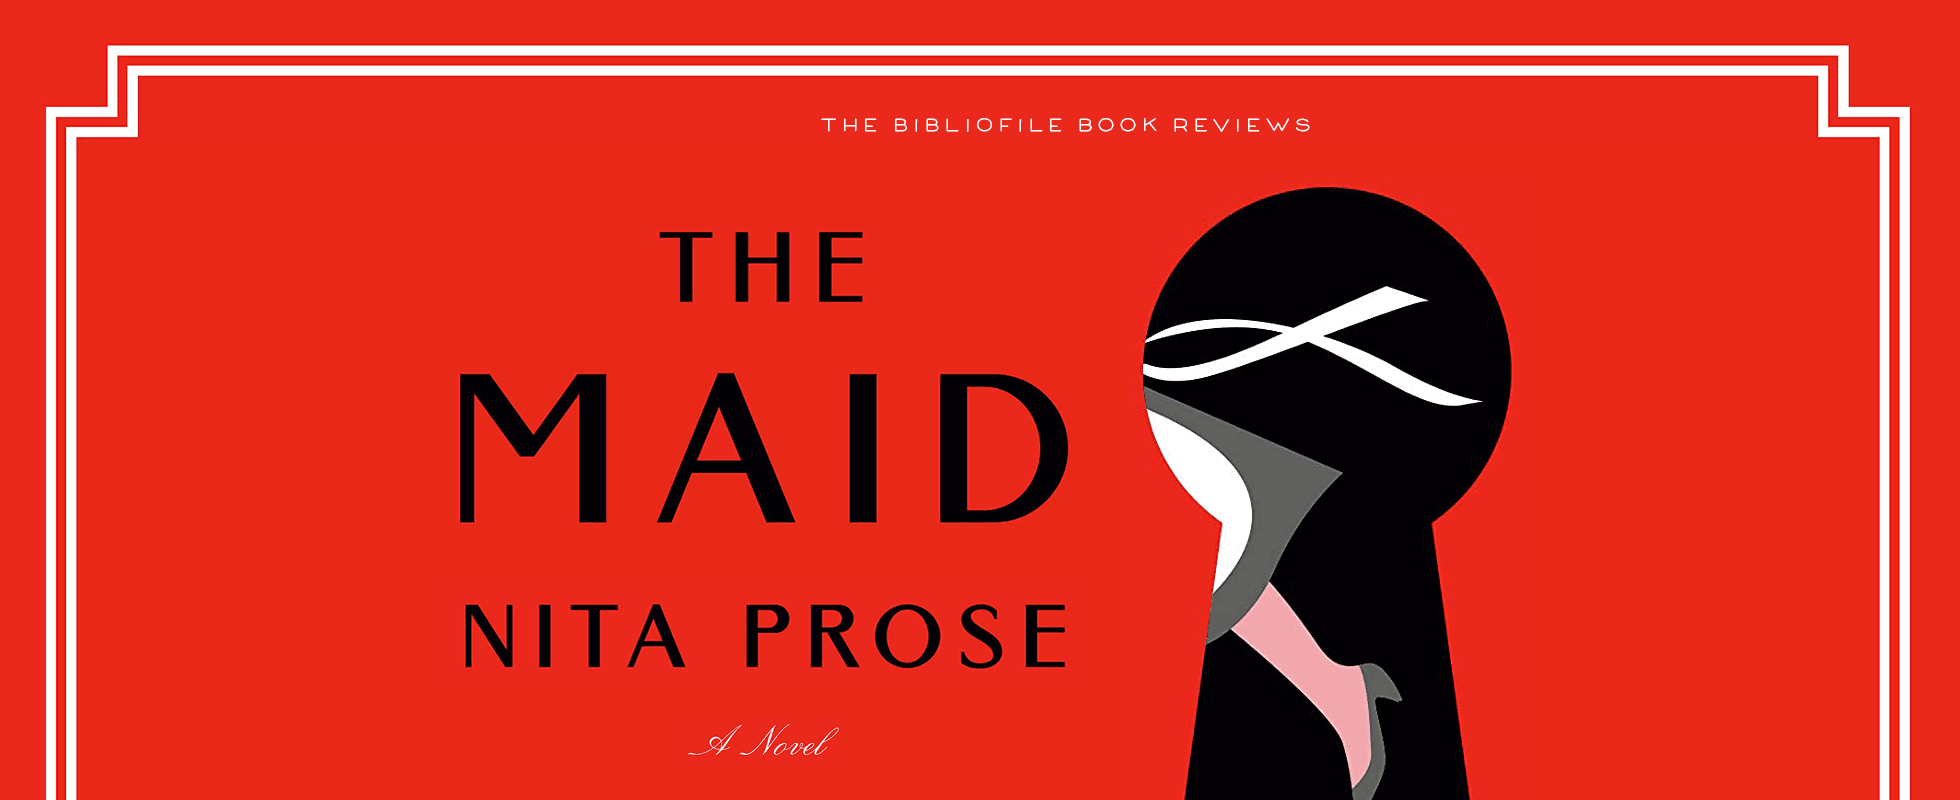 the maid by nita prose book review plot summary synopsis recap discussion spoilers